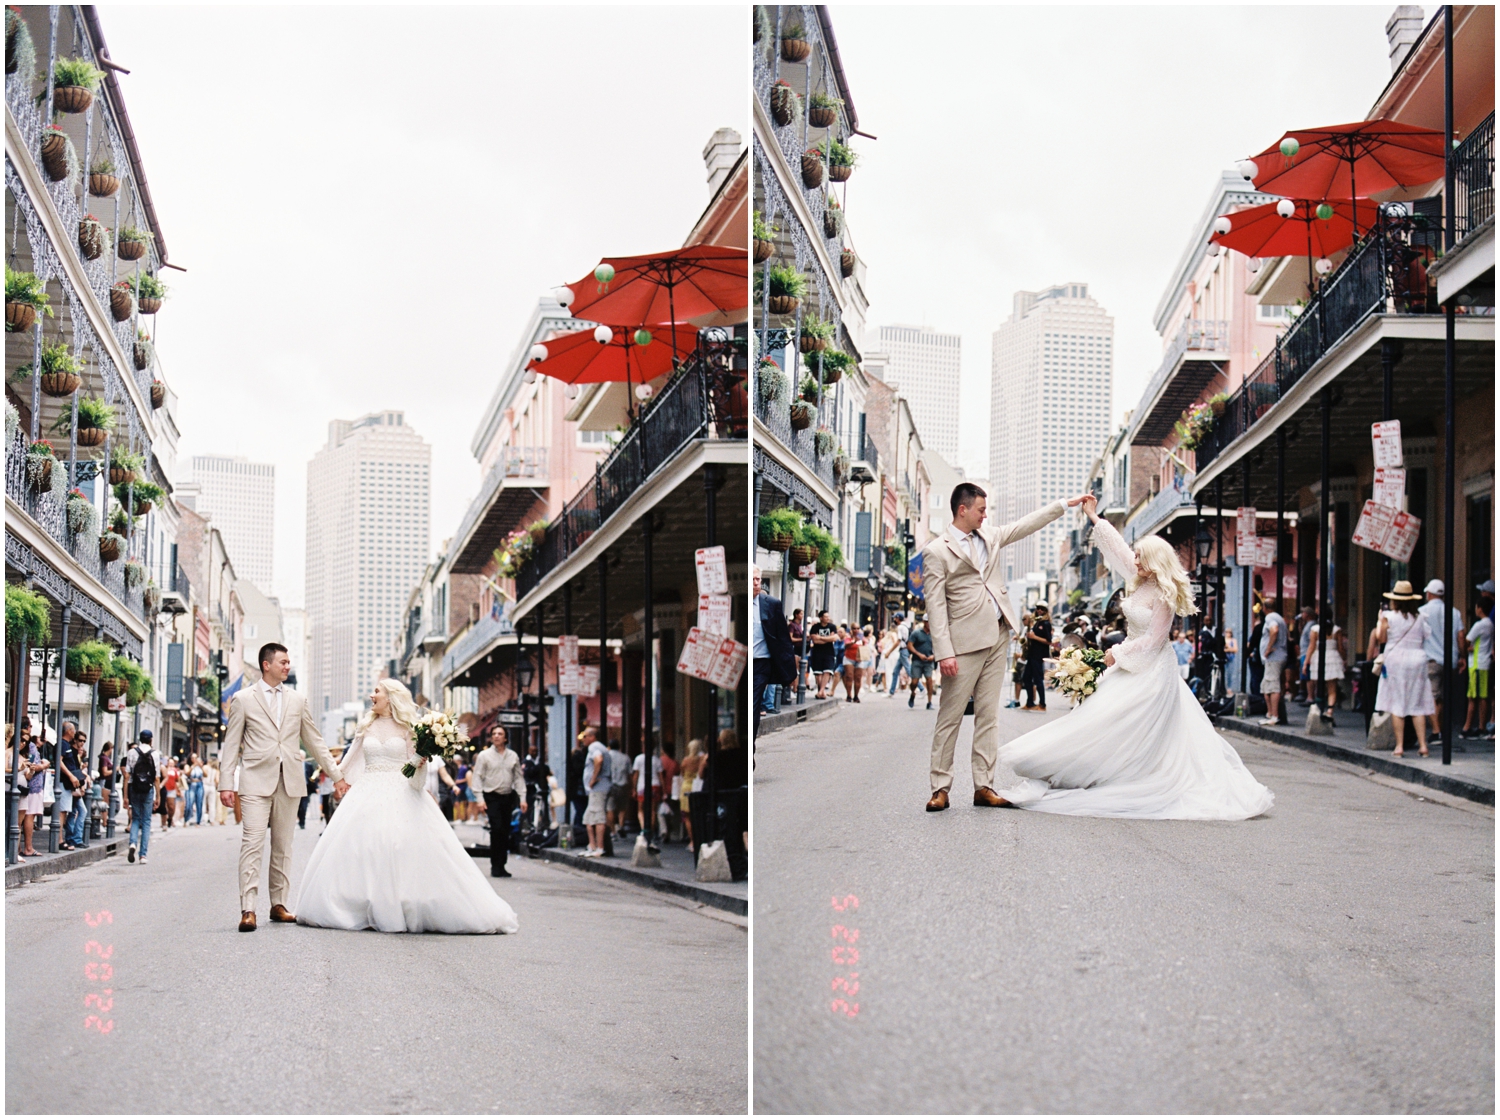 A groom twirls a bride in the street before their intimate wedding.